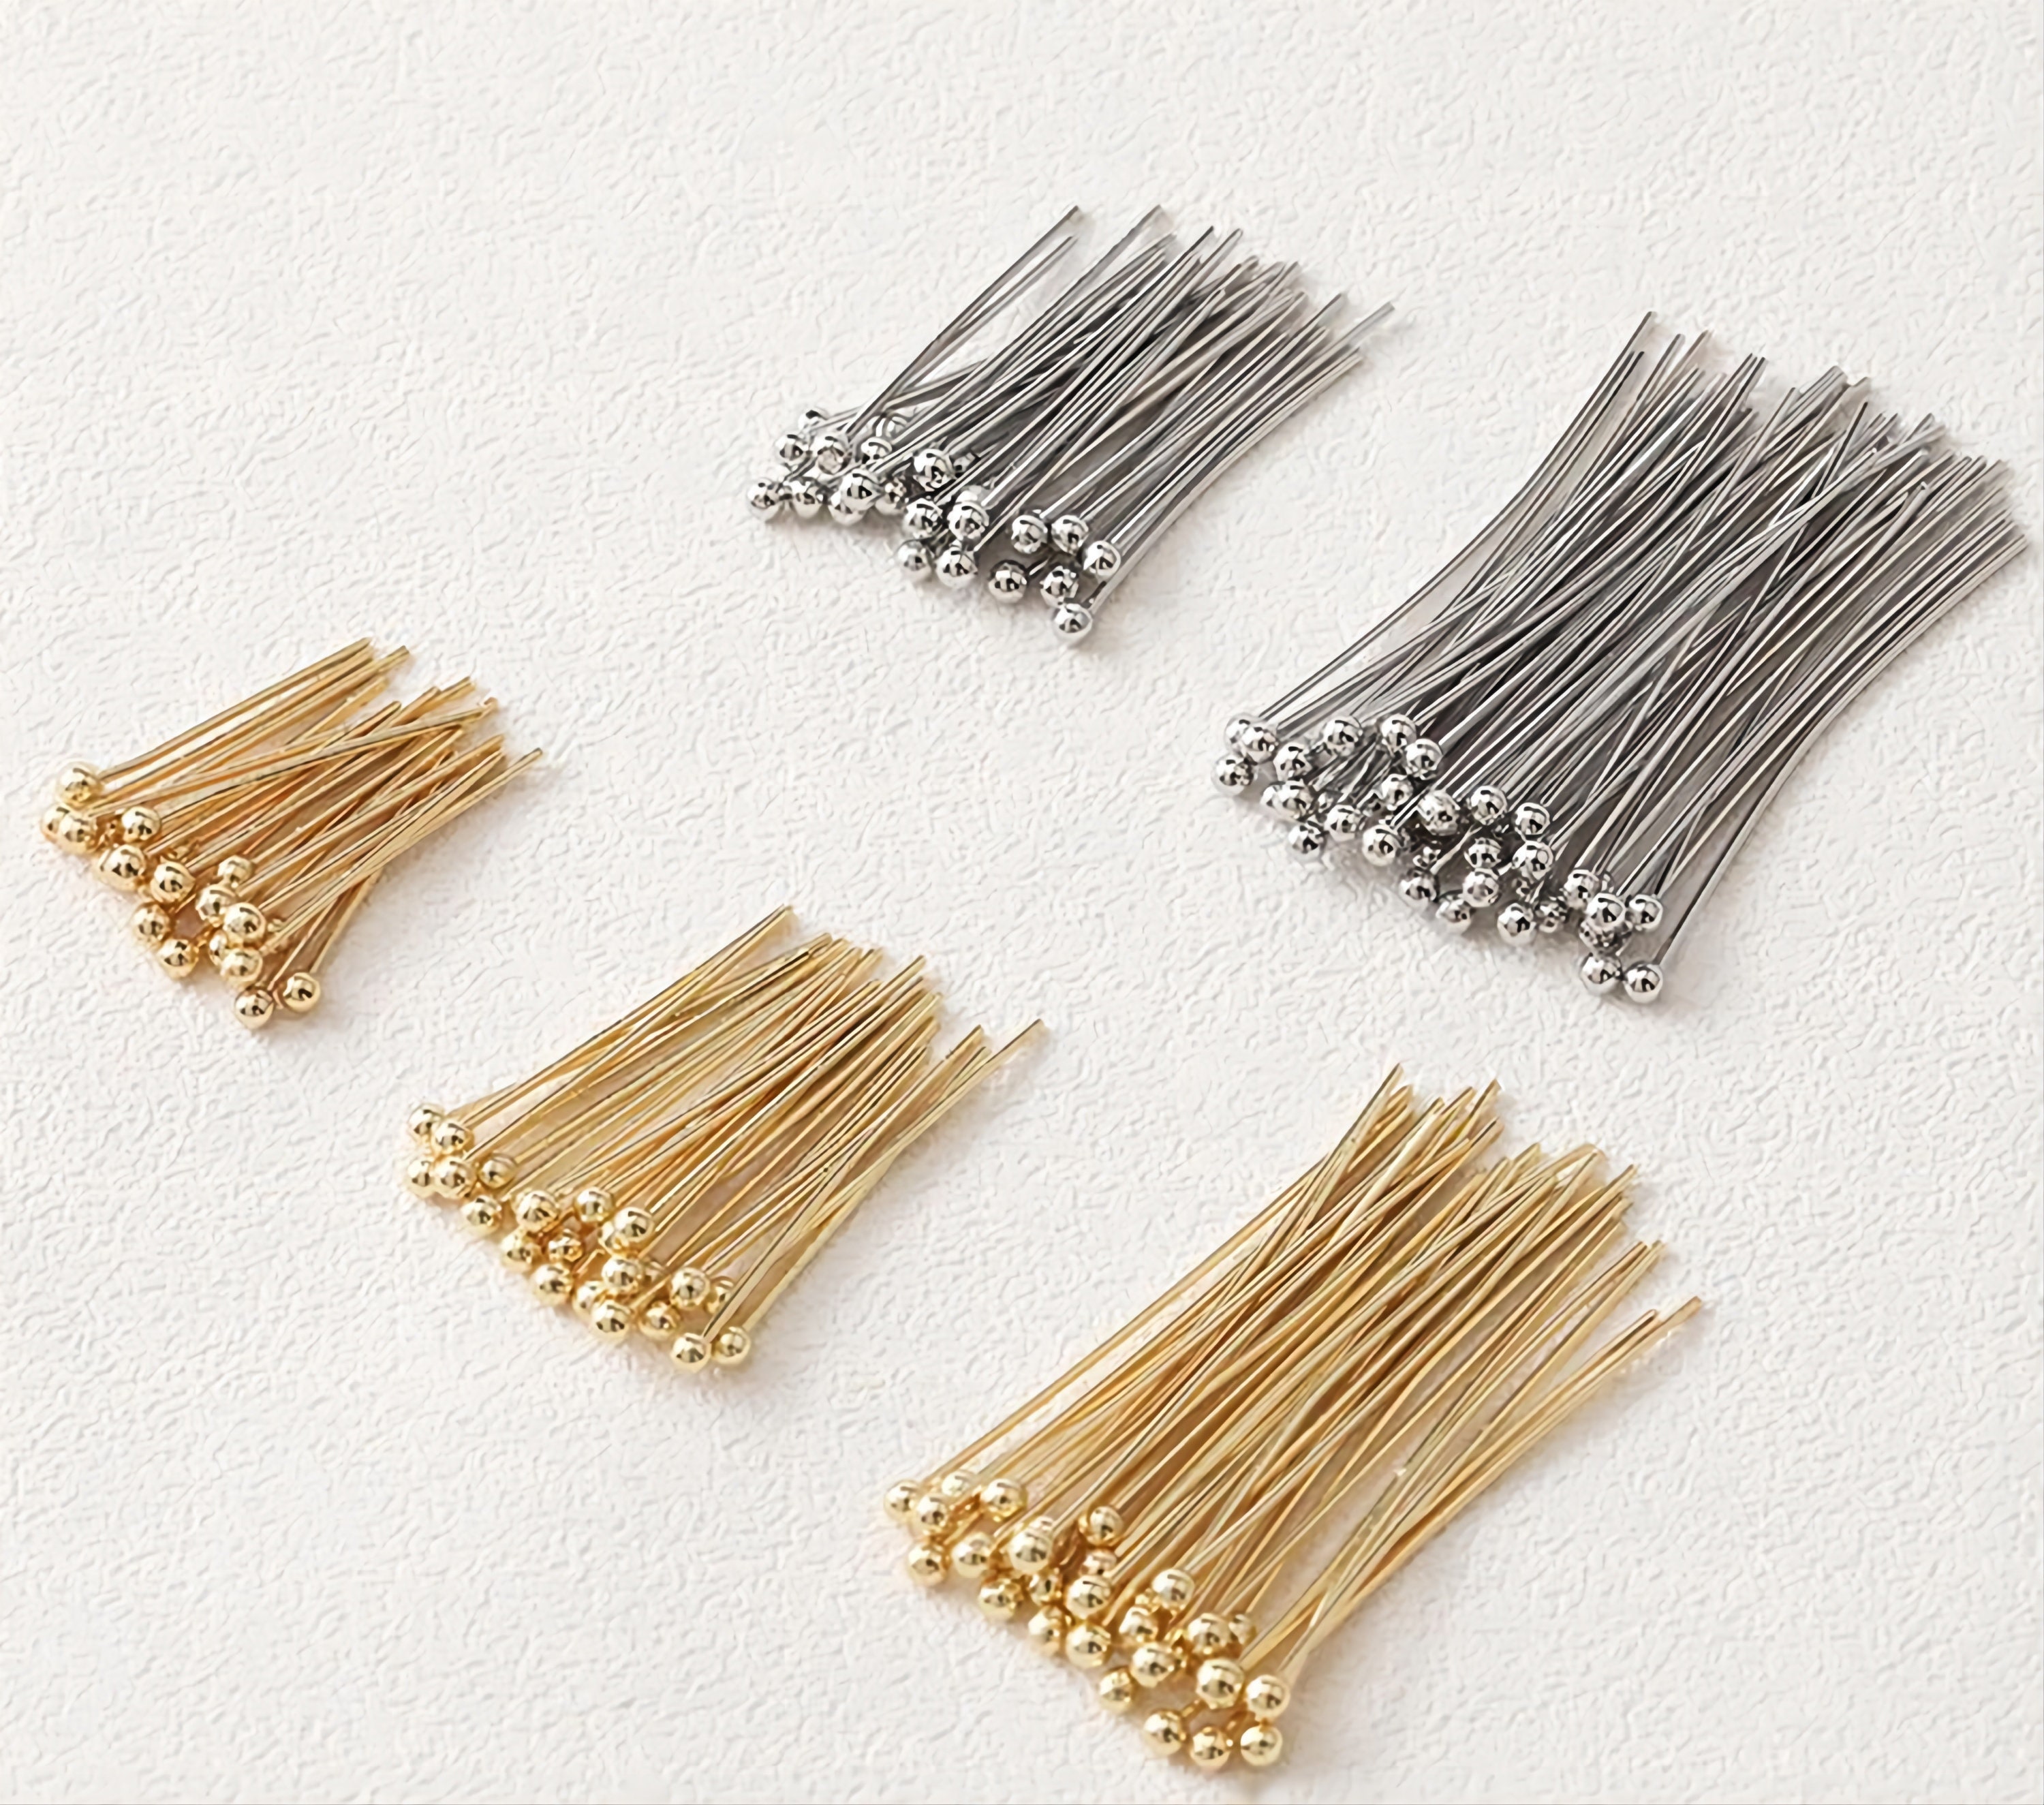 30 Pieces of Shiny Rose Gold Jewelry Pins, Ball Pins / Head Pins, Pins for  Beads, Flexible Headpins B004-BRG-30 30 Pcs 